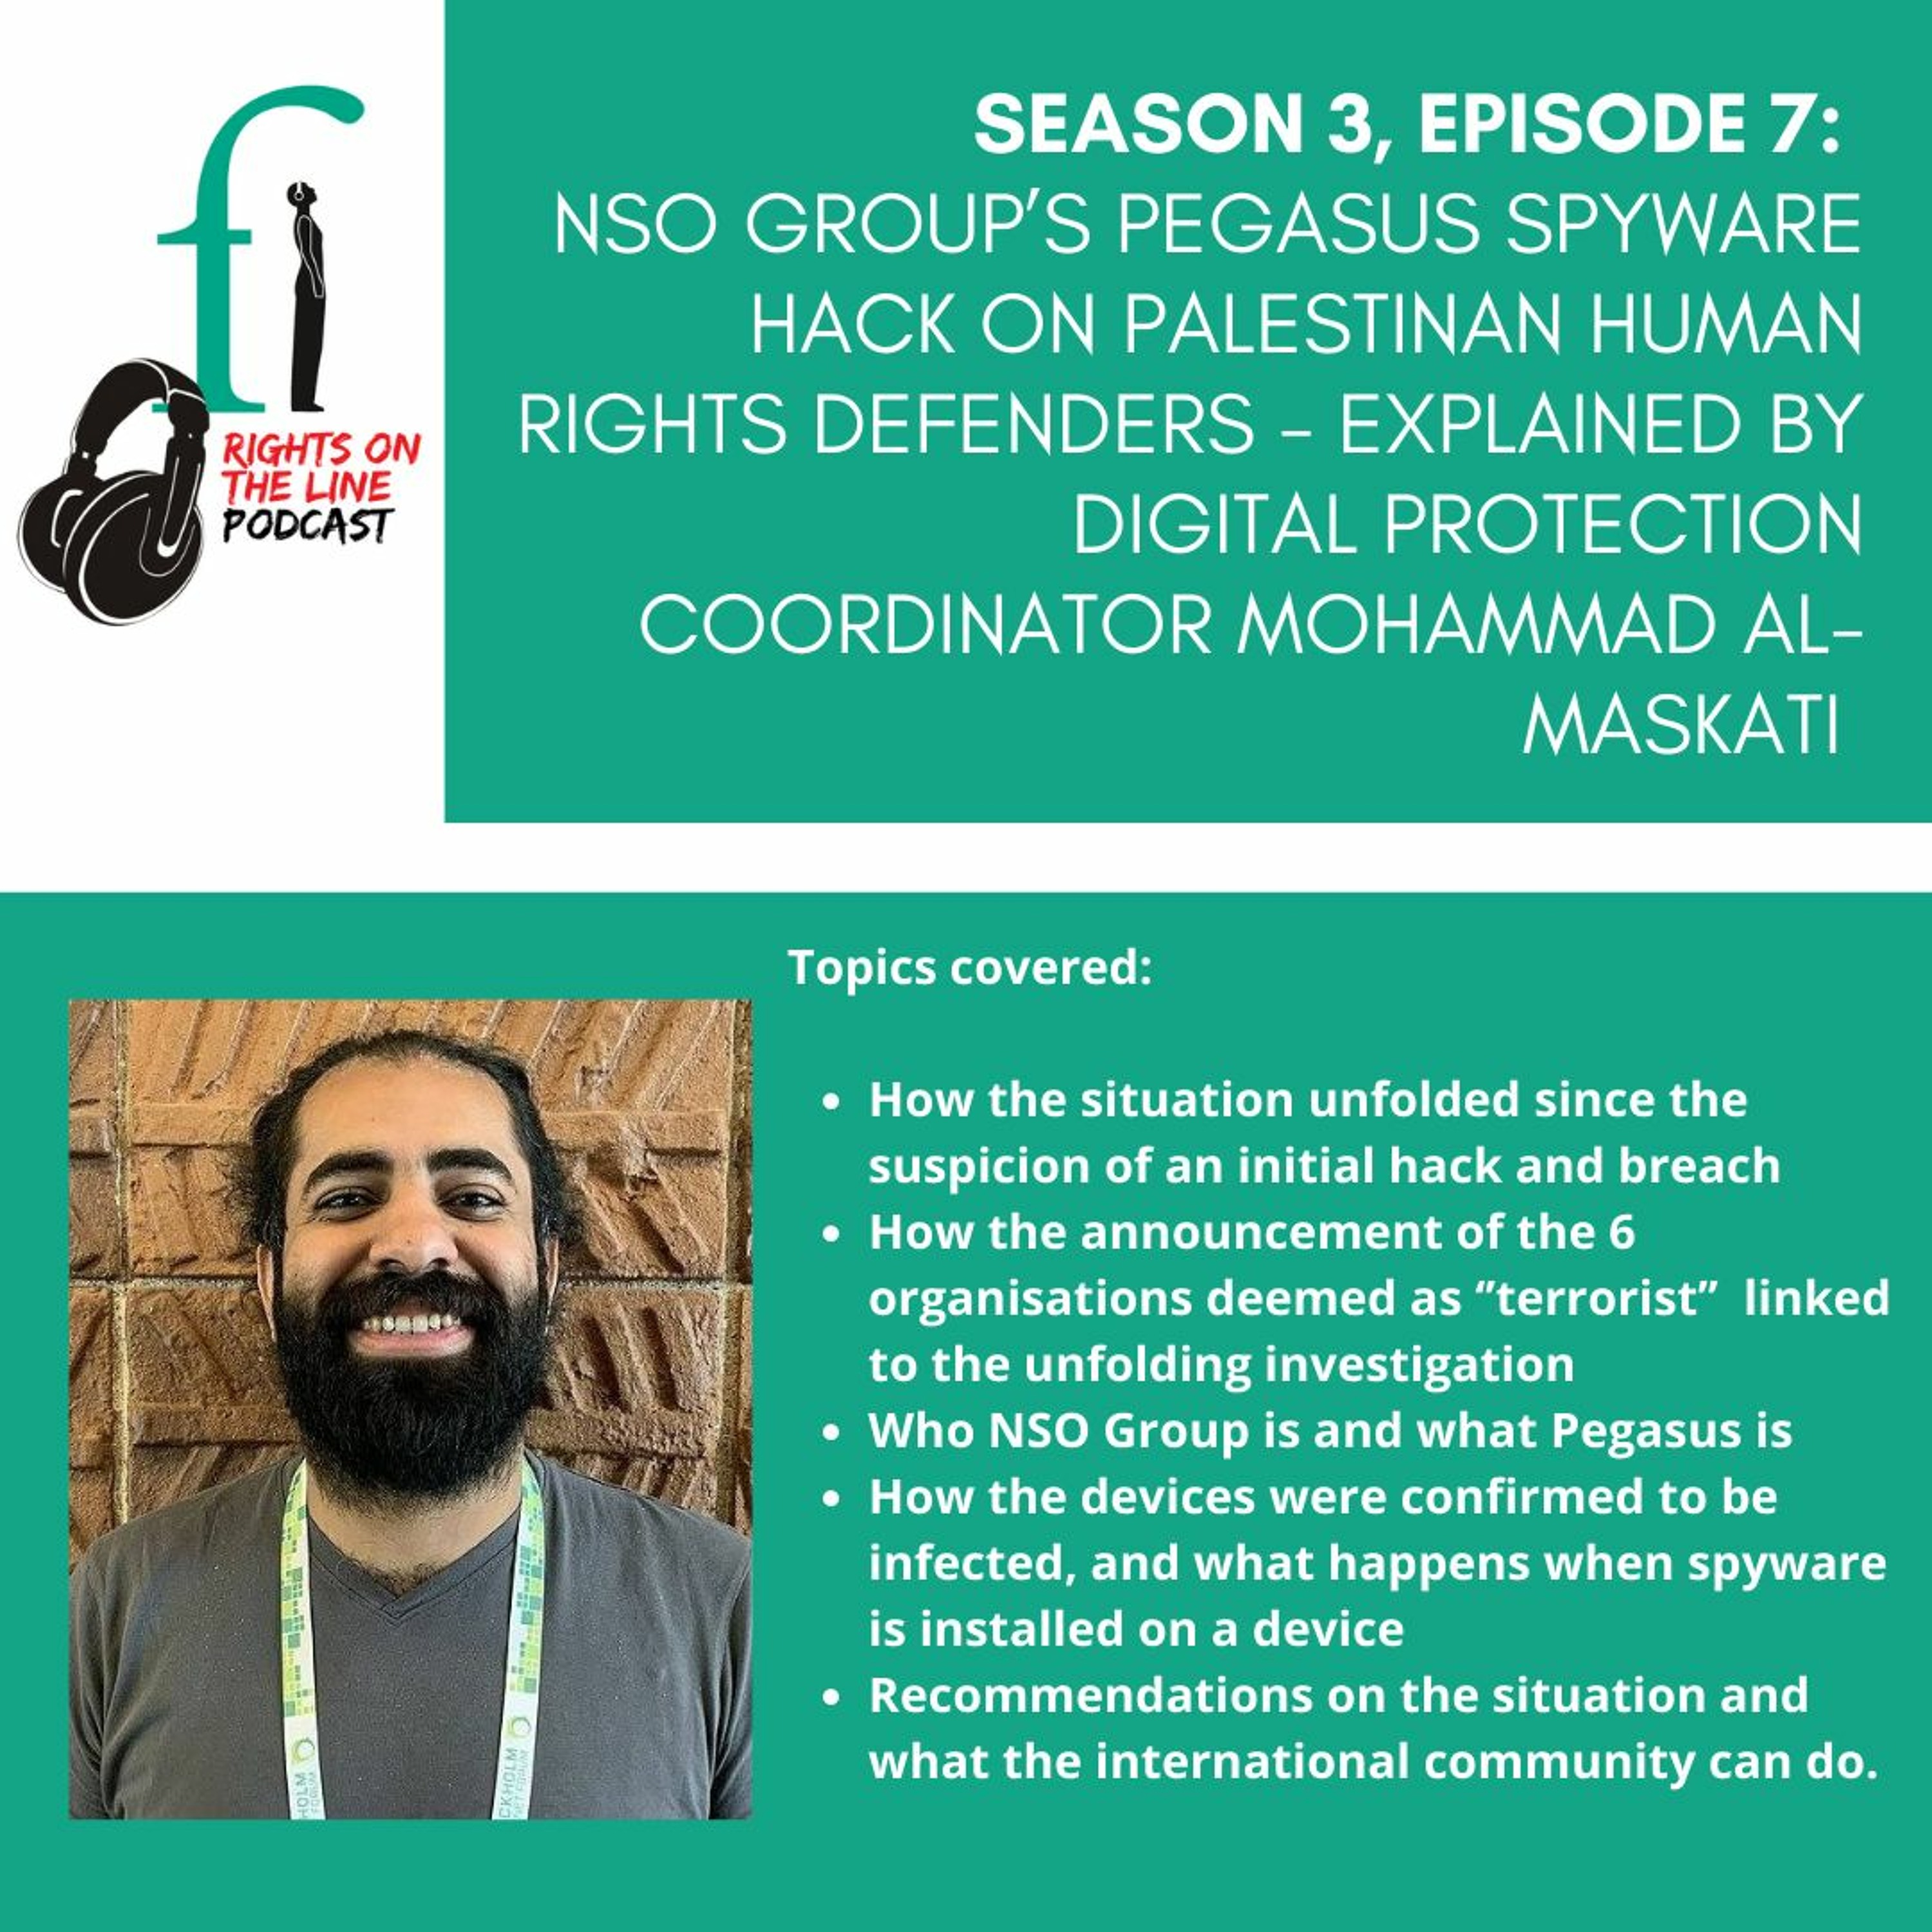 NSO Group’s Pegasus Spyware hack on Palestinan HRDs - explained by DPC Mohammad Al-Maskati